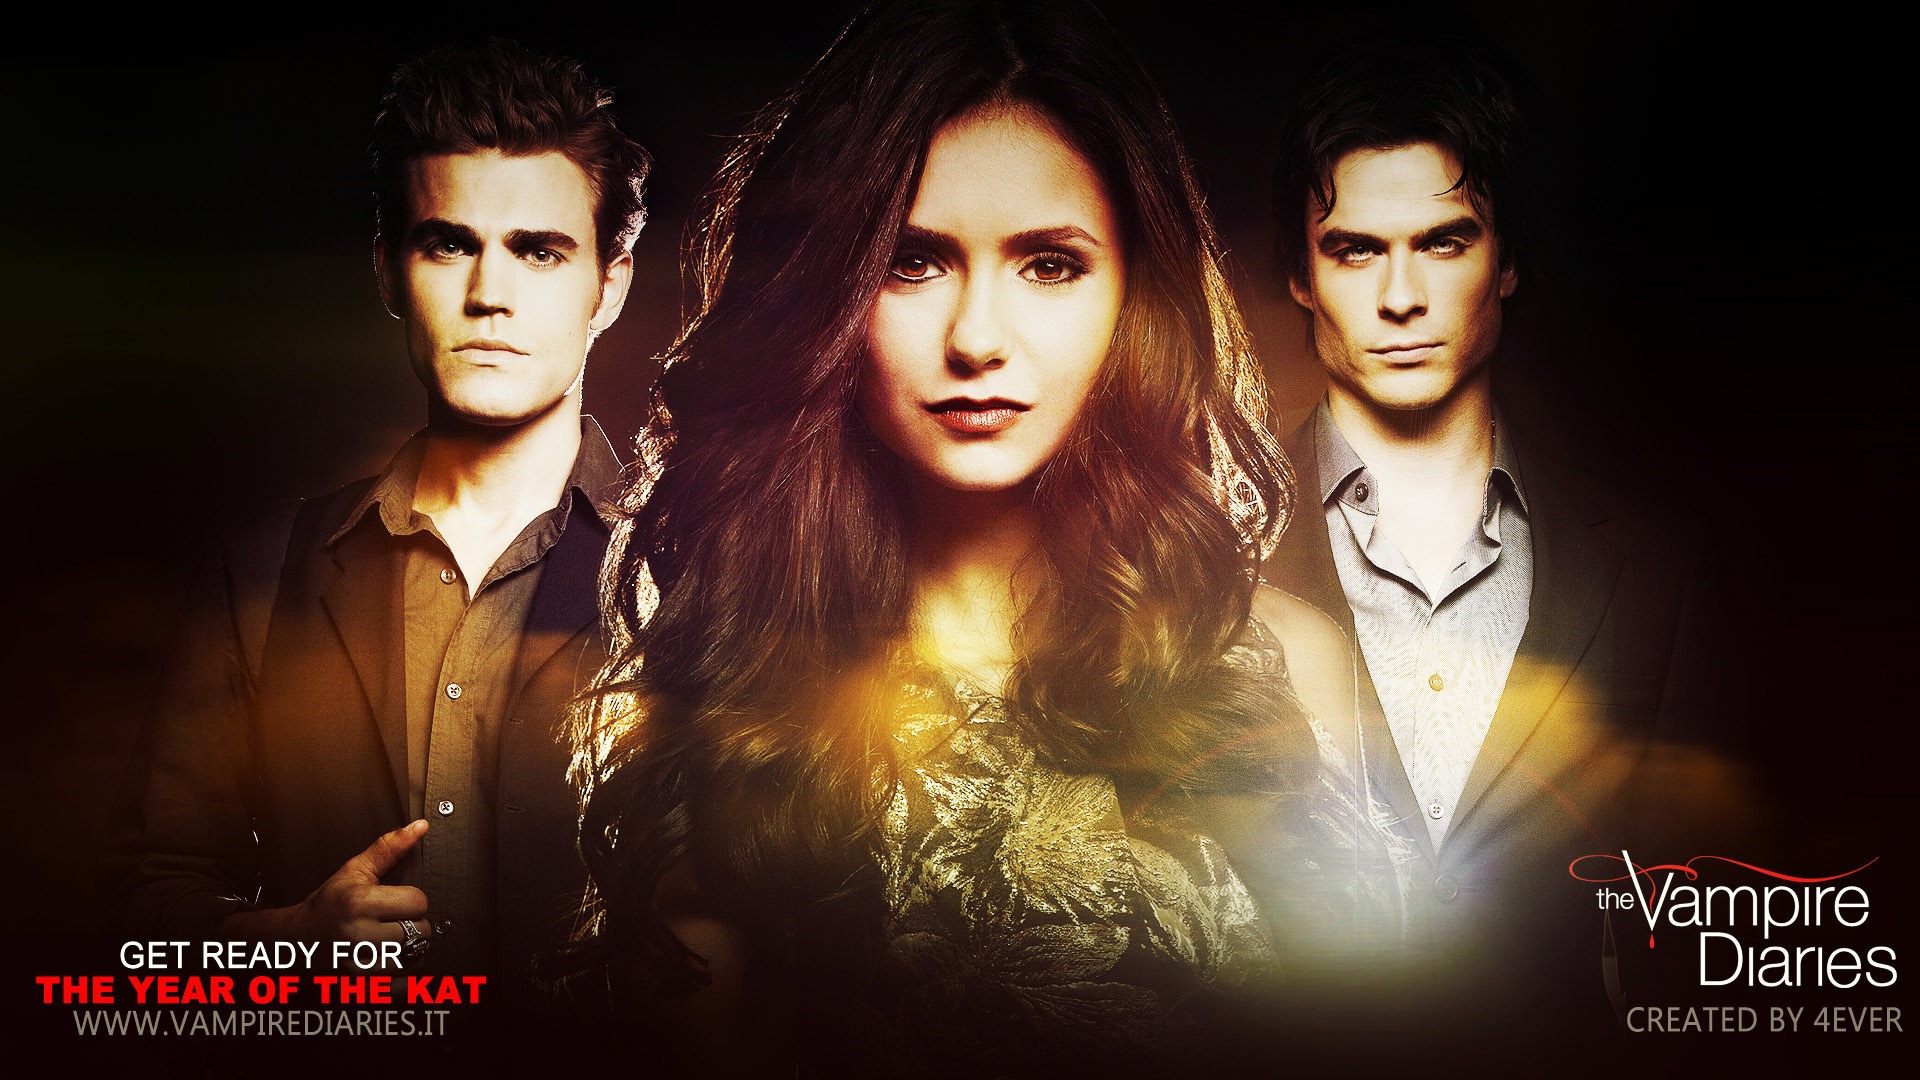 The Vampire Diaries HD Wallpapers #17 - 1920x1080